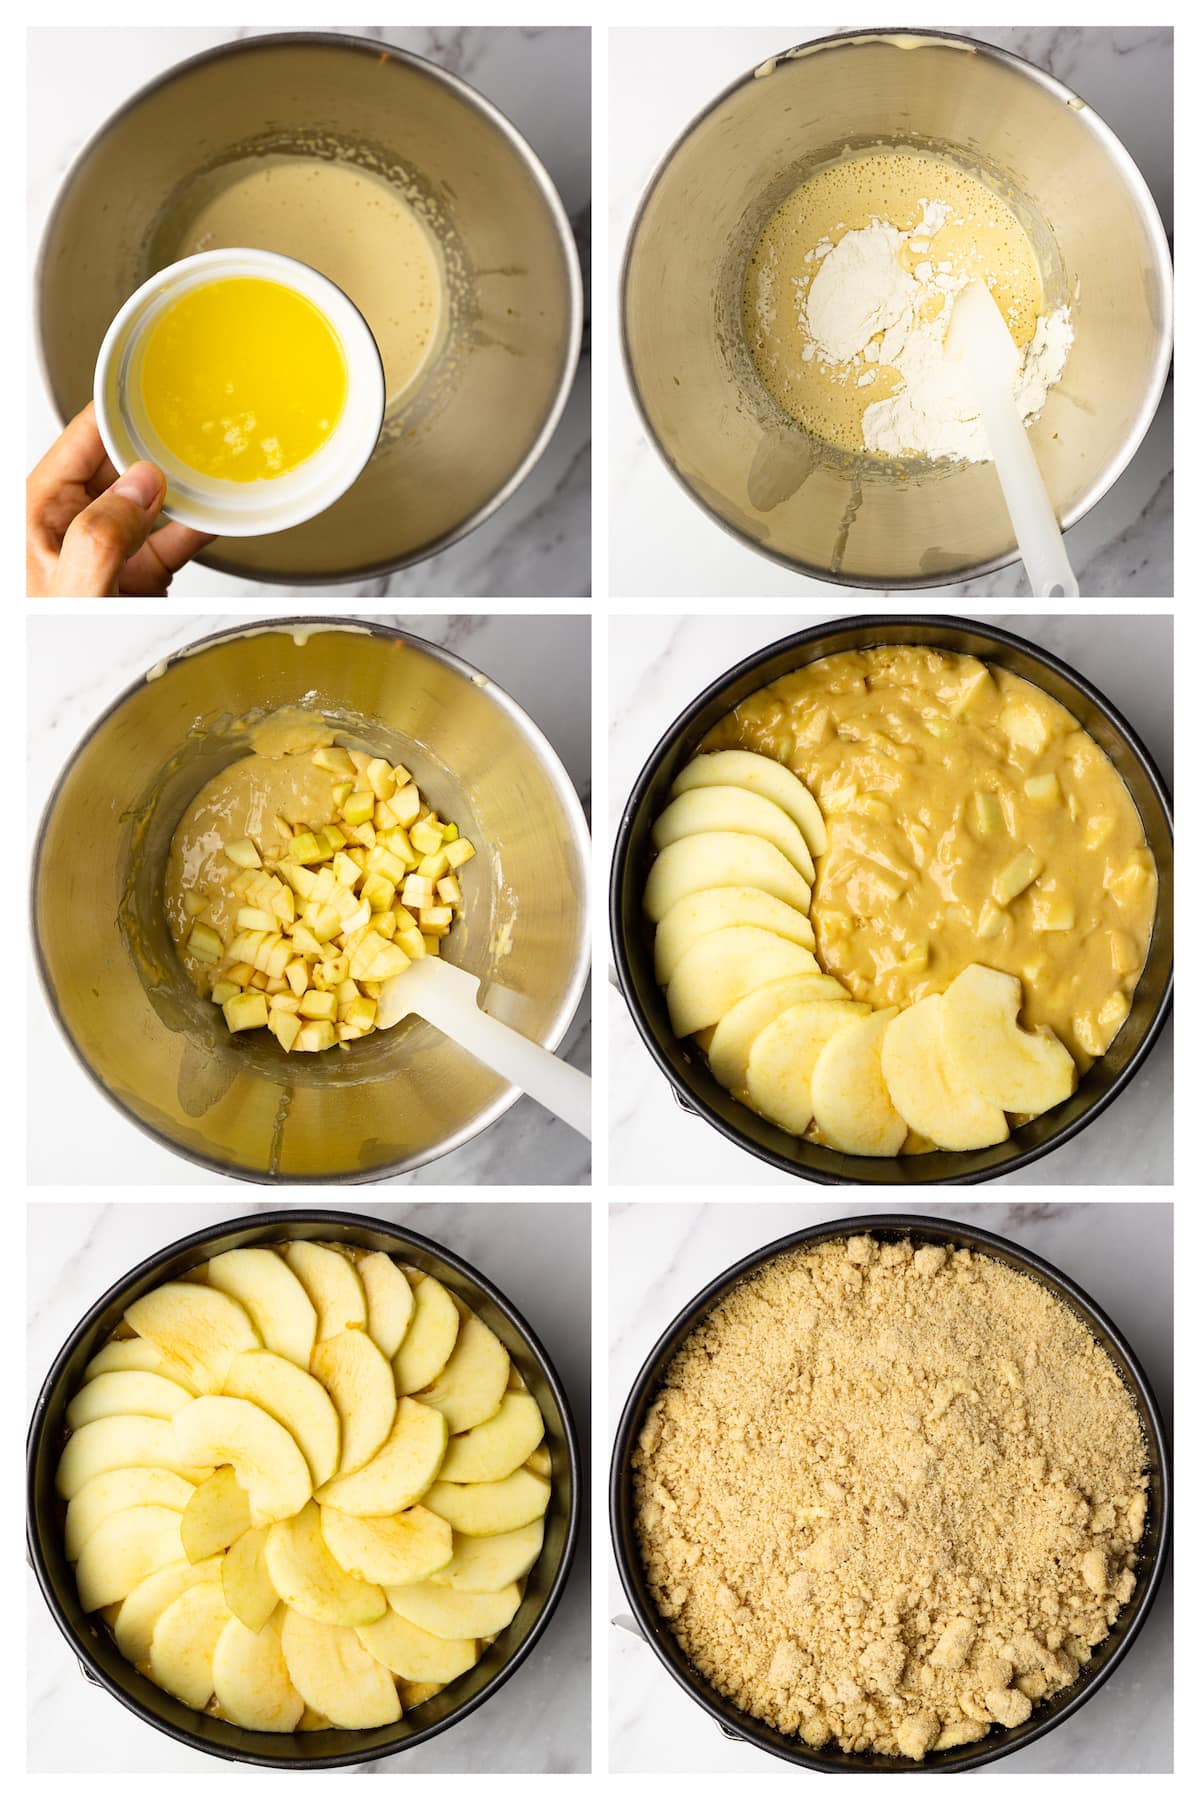 Collage image showing how to make apple crumb cake batter and how to assemble the cake before baking.